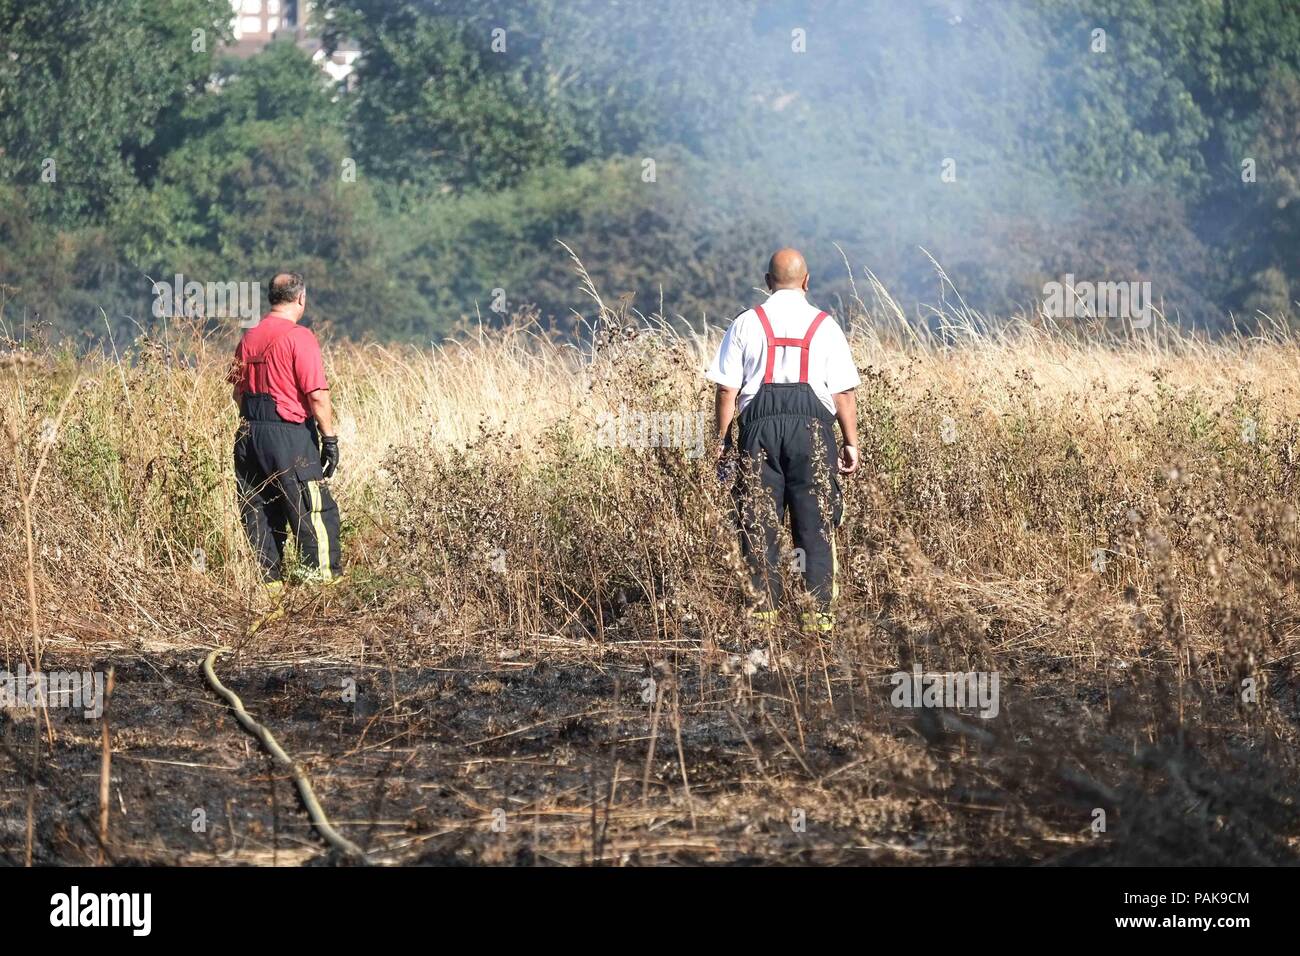 London, UK. 23rd July 2018.. Twenty fire engines and around 125 firefighters tackle a  grass fire on Woolwich Common off Ha Ha Road. Credit : Claire Doherty/Alamy Live News Stock Photo